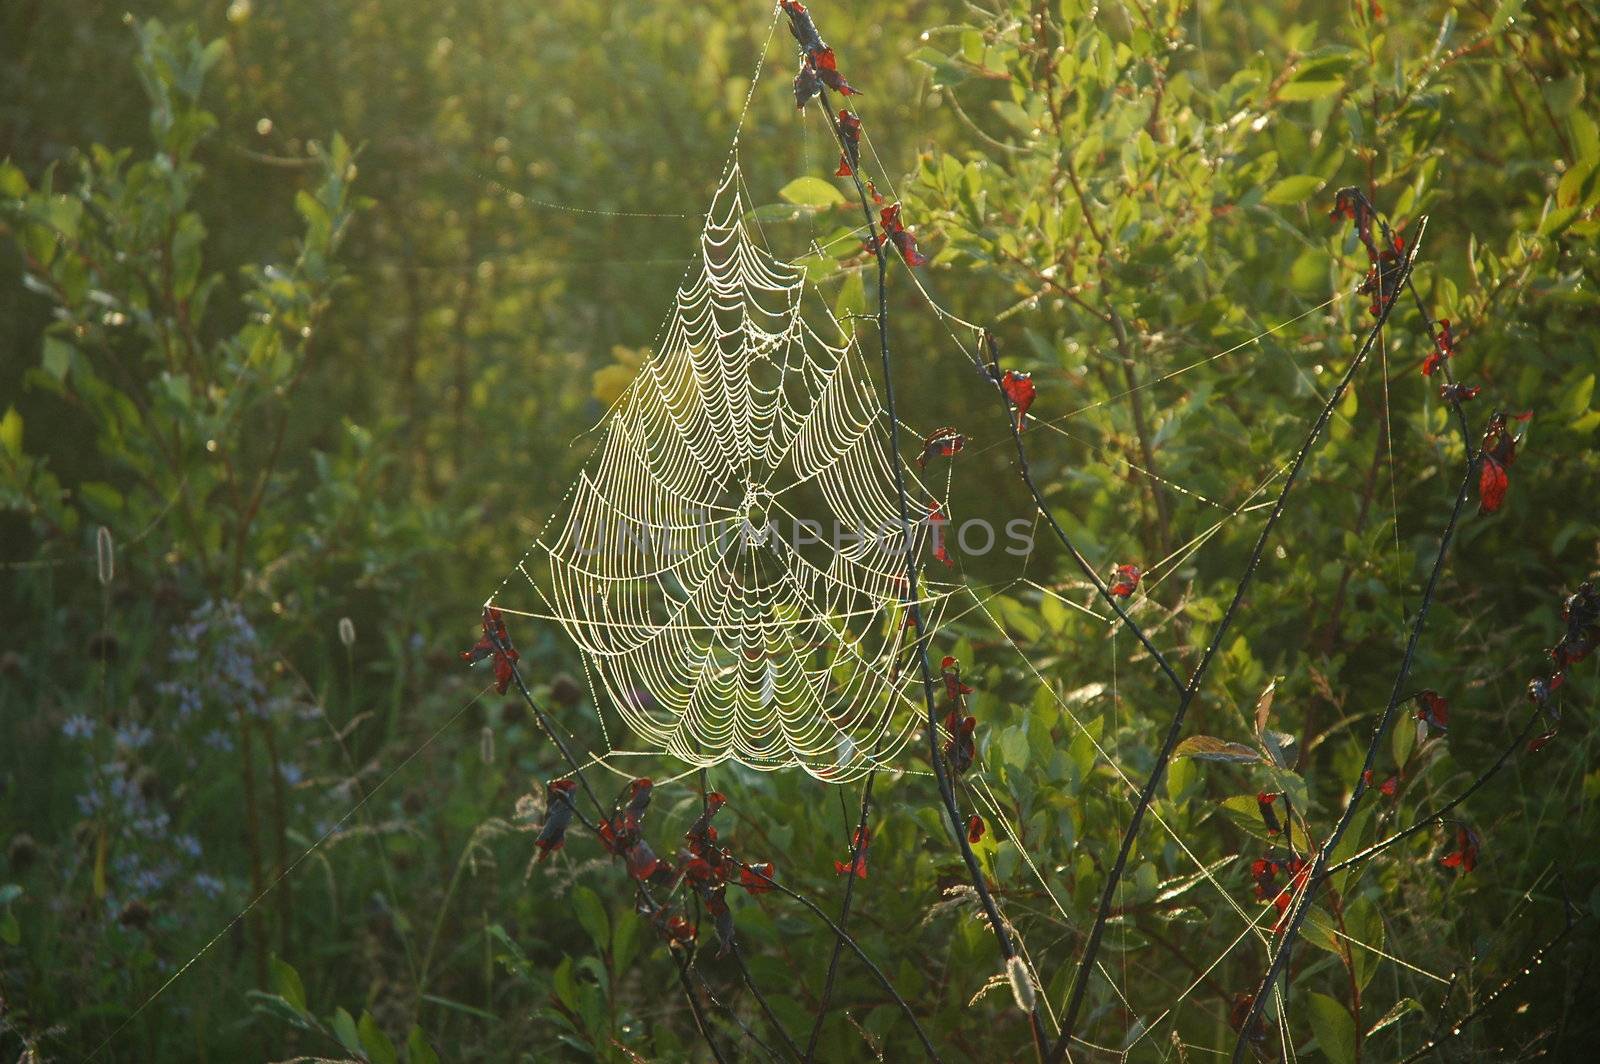 Spider web in the morning sun by photopierre